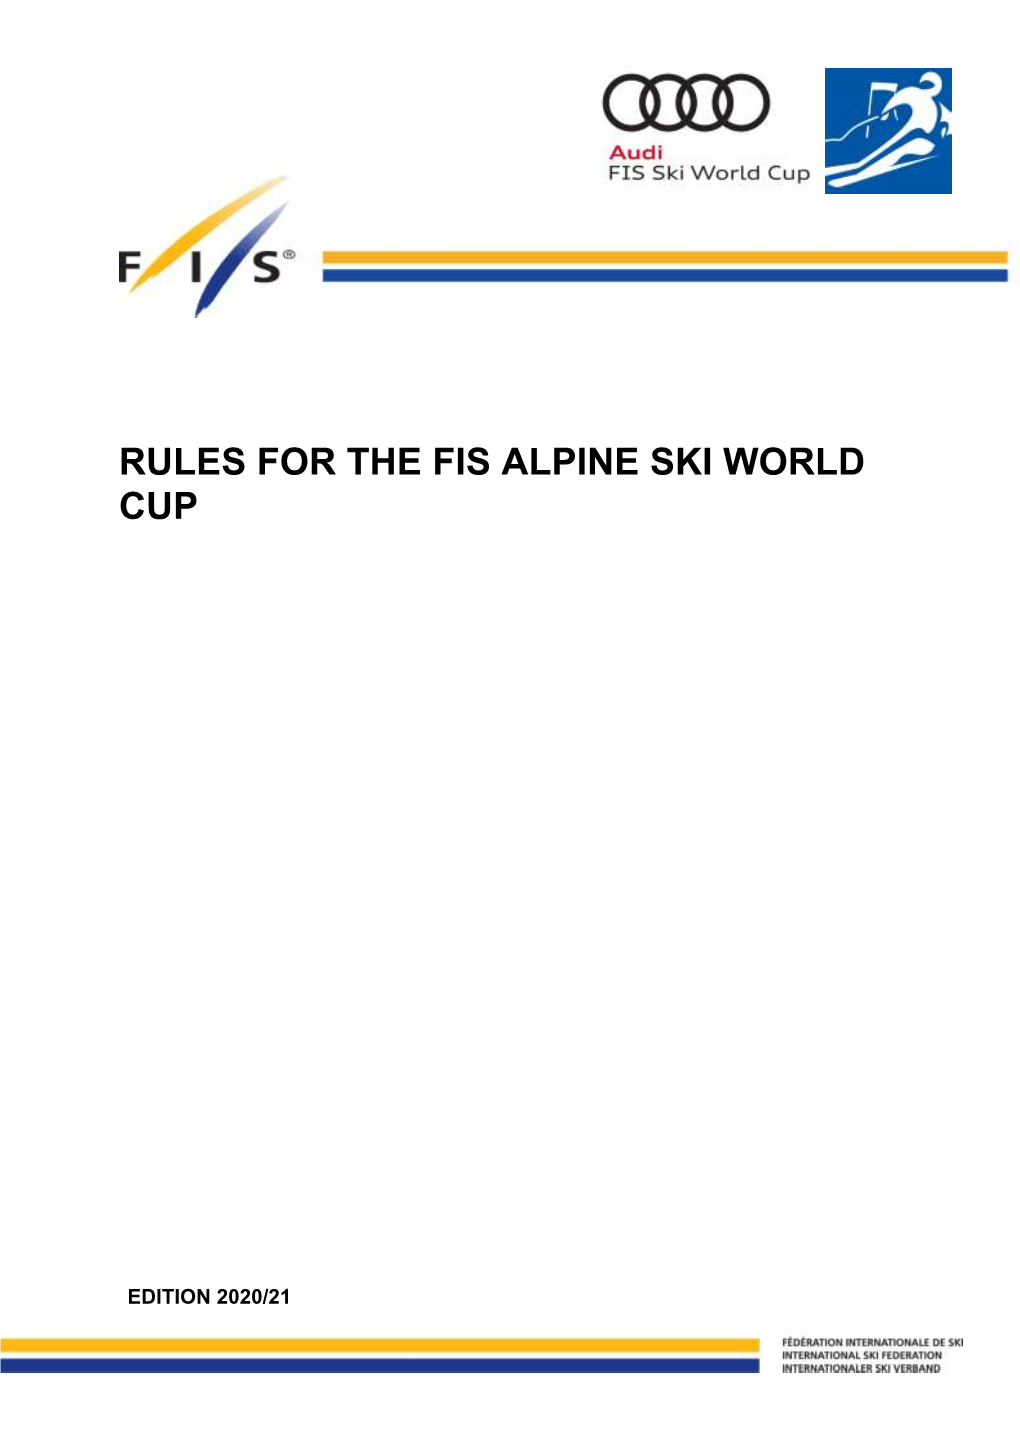 Rules for the Alpine Fis World Cup